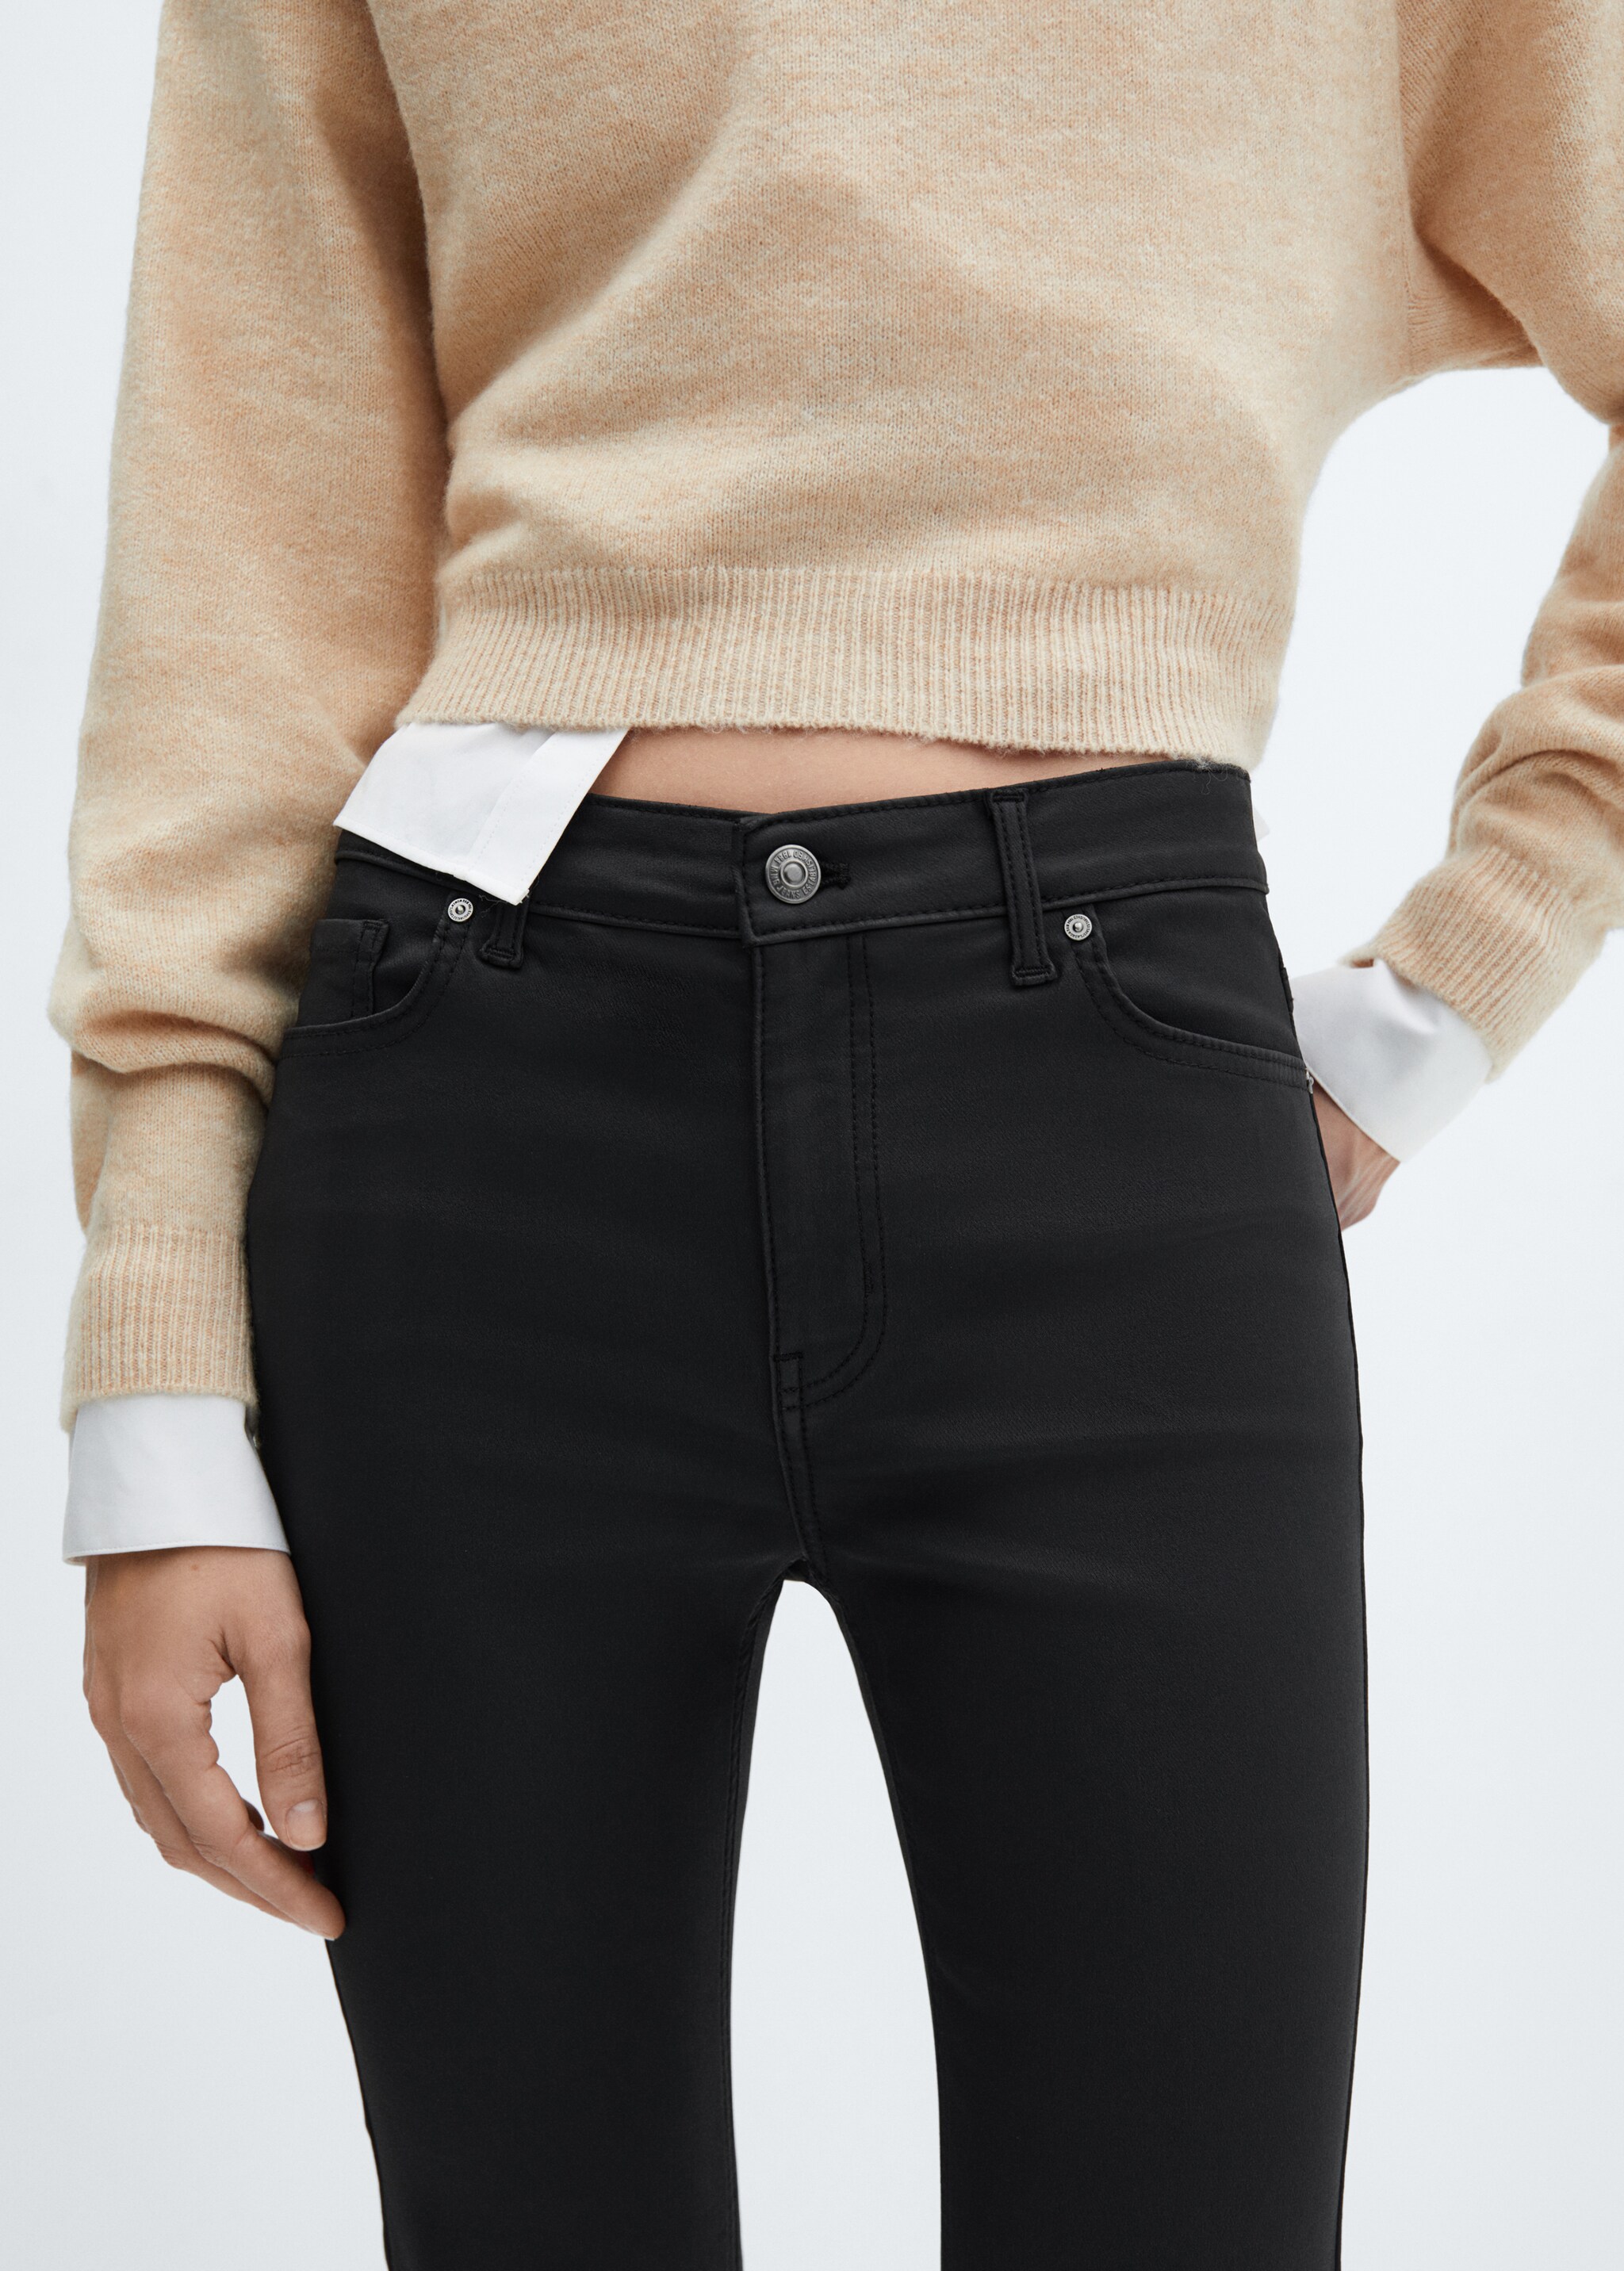 Sienna flare crop waxed jeans - Details of the article 6